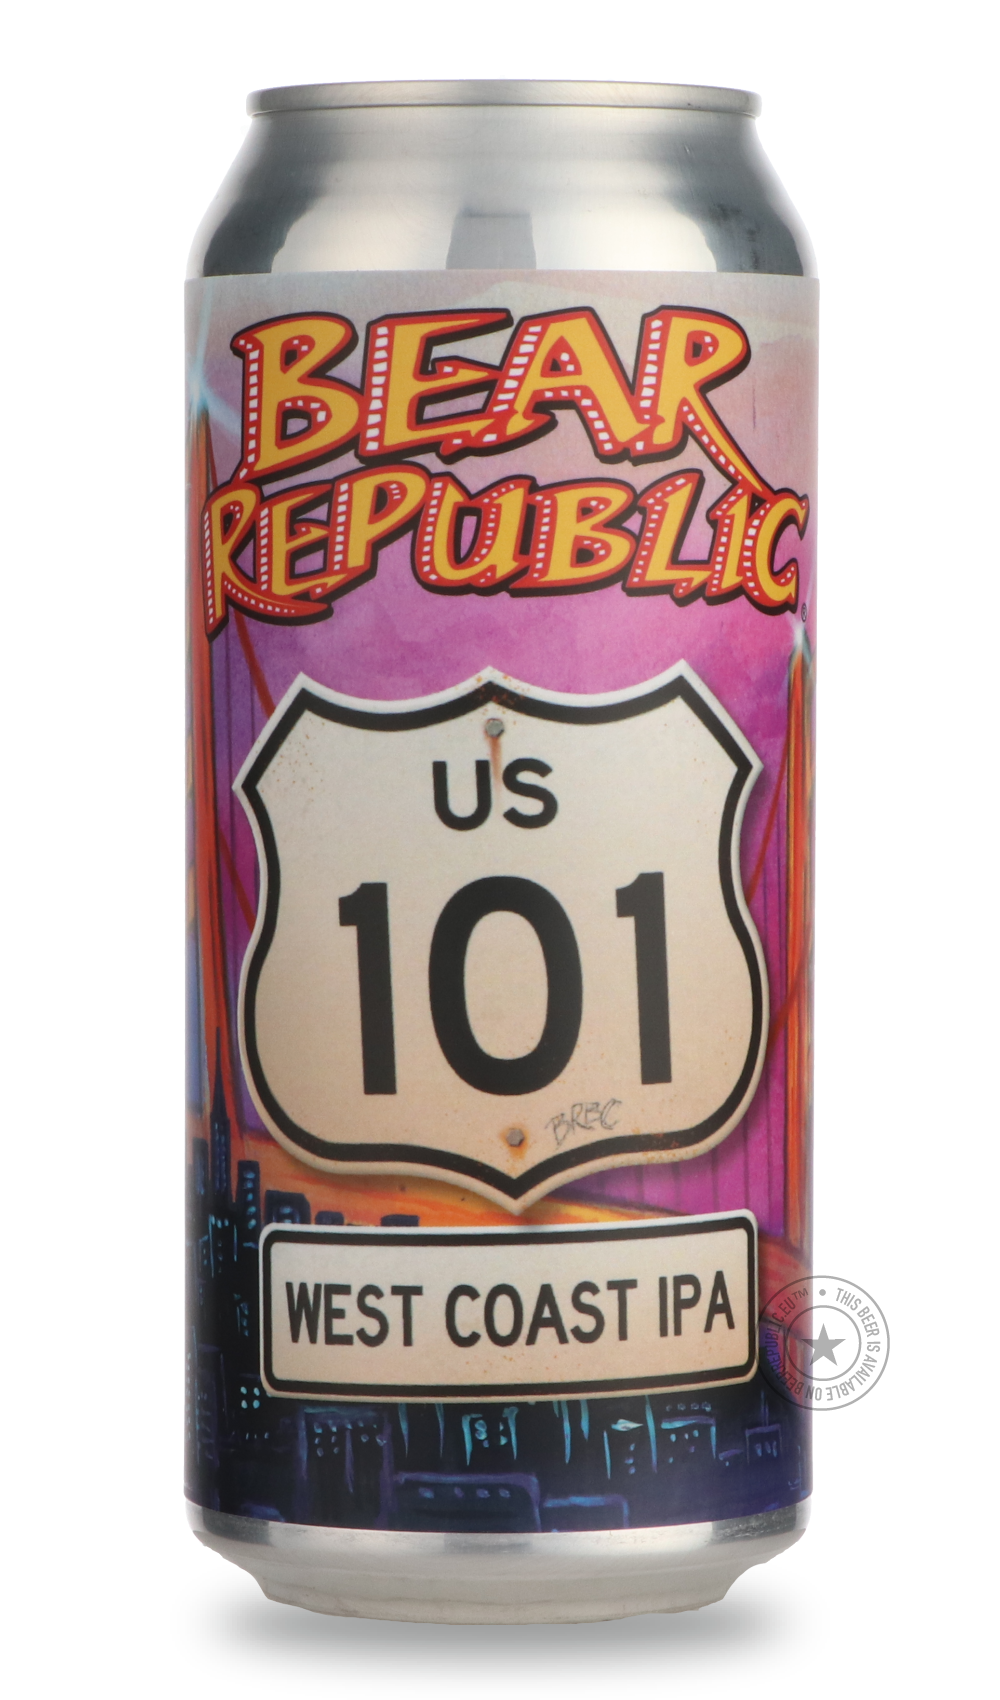 -Bear Republic- HWY 101-IPA- Only @ Beer Republic - The best online beer store for American & Canadian craft beer - Buy beer online from the USA and Canada - Bier online kopen - Amerikaans bier kopen - Craft beer store - Craft beer kopen - Amerikanisch bier kaufen - Bier online kaufen - Acheter biere online - IPA - Stout - Porter - New England IPA - Hazy IPA - Imperial Stout - Barrel Aged - Barrel Aged Imperial Stout - Brown - Dark beer - Blond - Blonde - Pilsner - Lager - Wheat - Weizen - Amber - Barley Wi